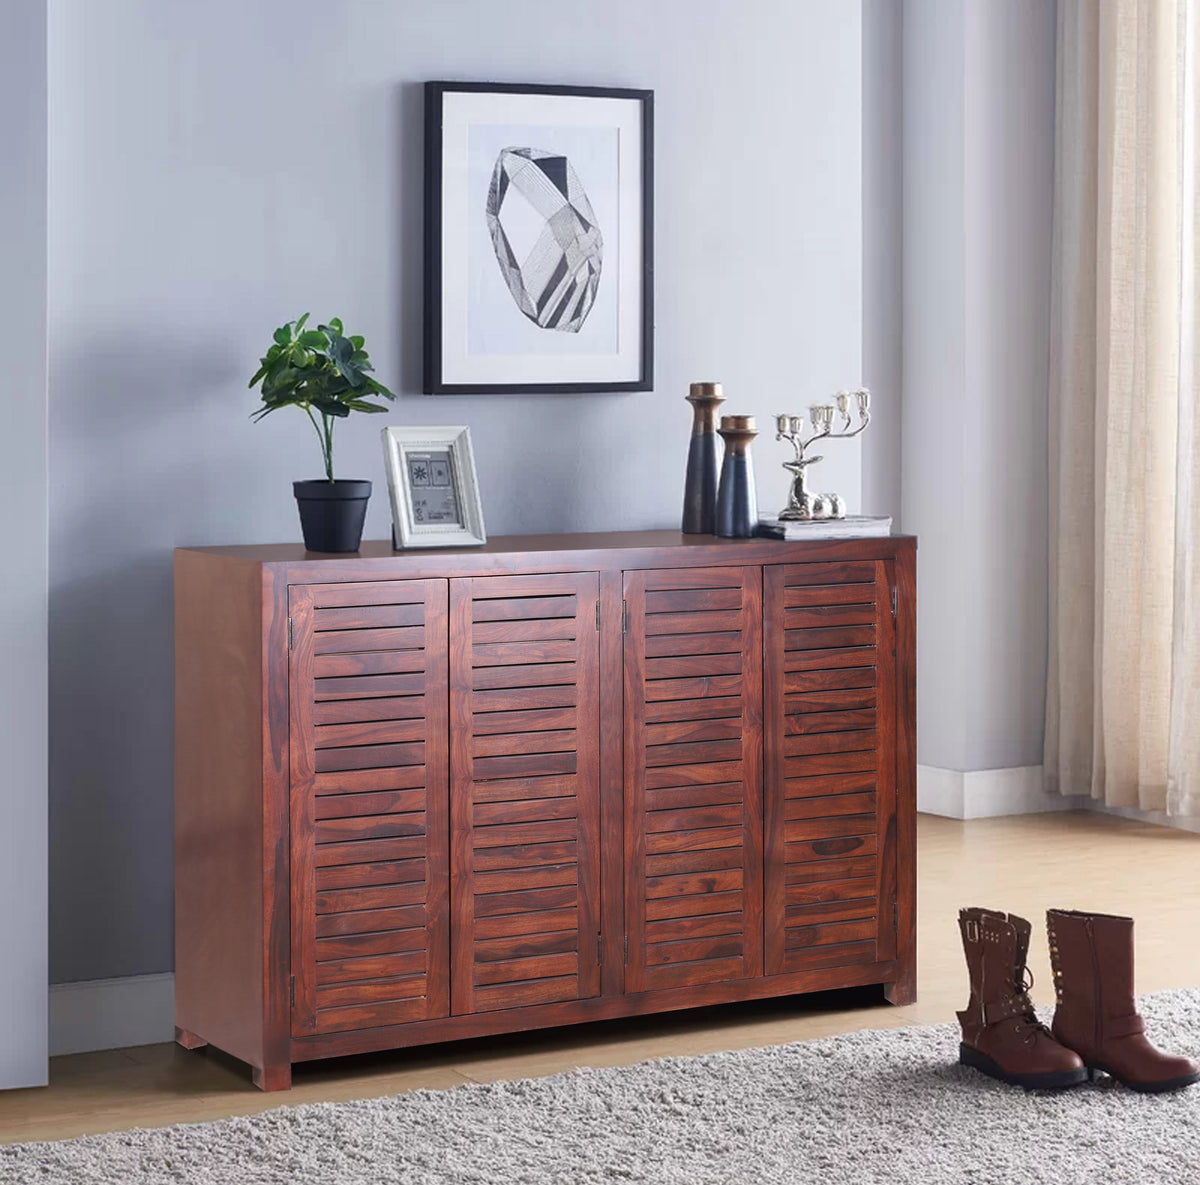 Haze Solid Wood Four Door with One Drawer Shoe Rack in Walnut Finish